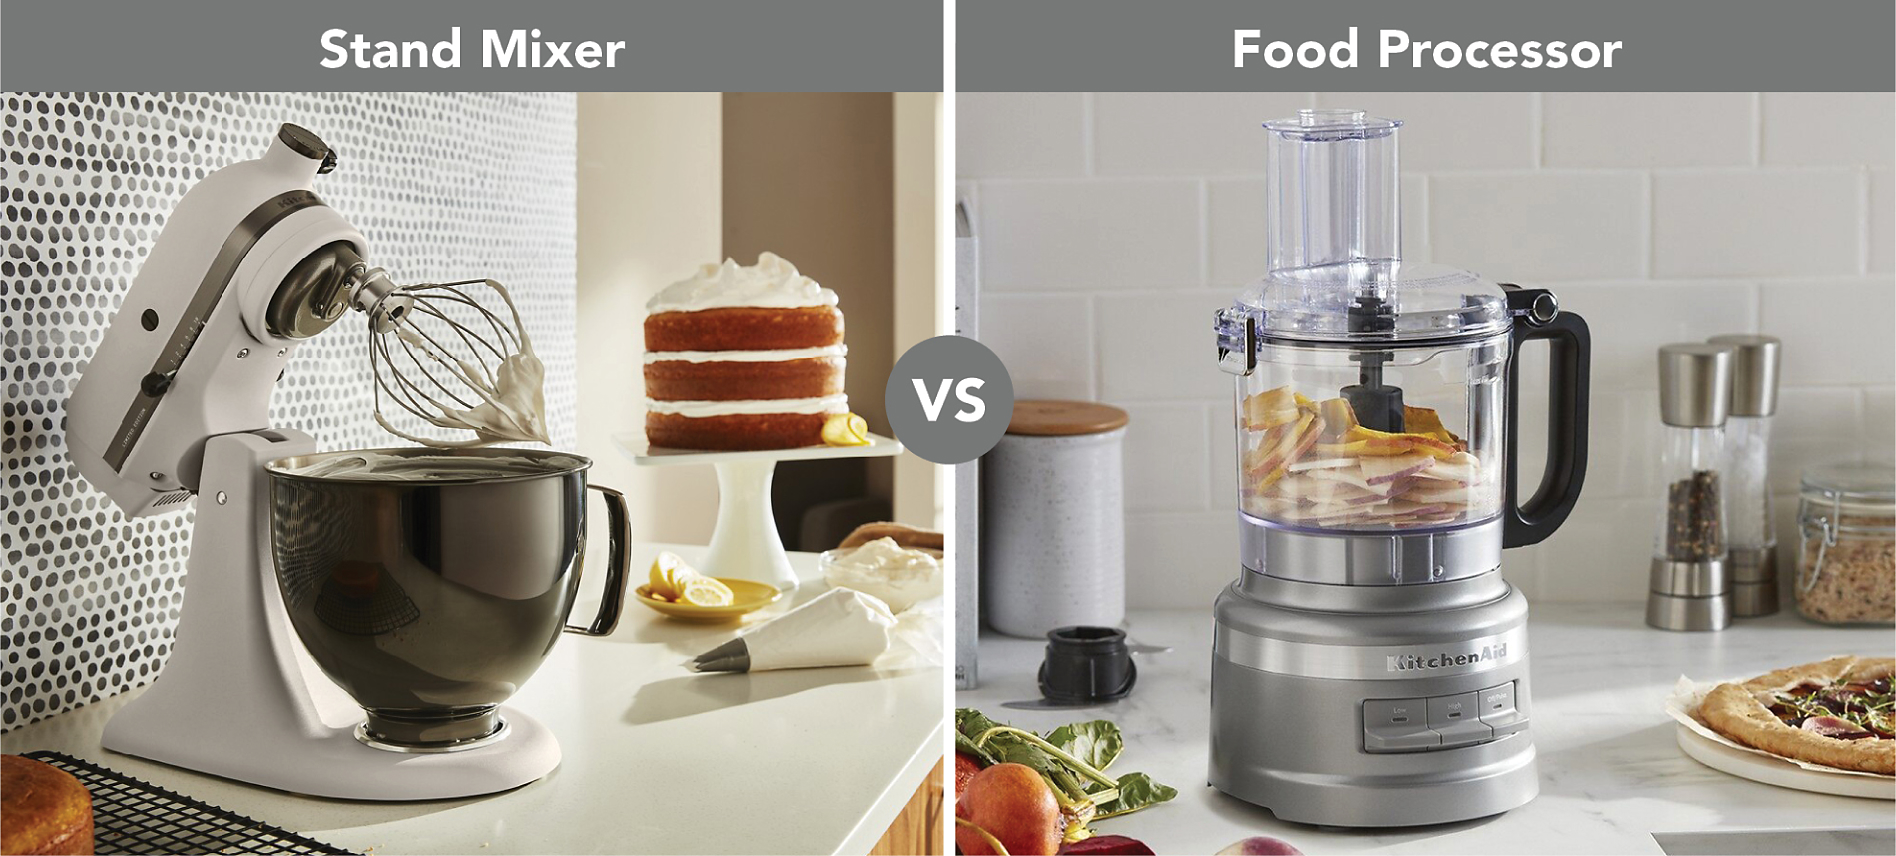 Stand mixer and food processor comparison picture